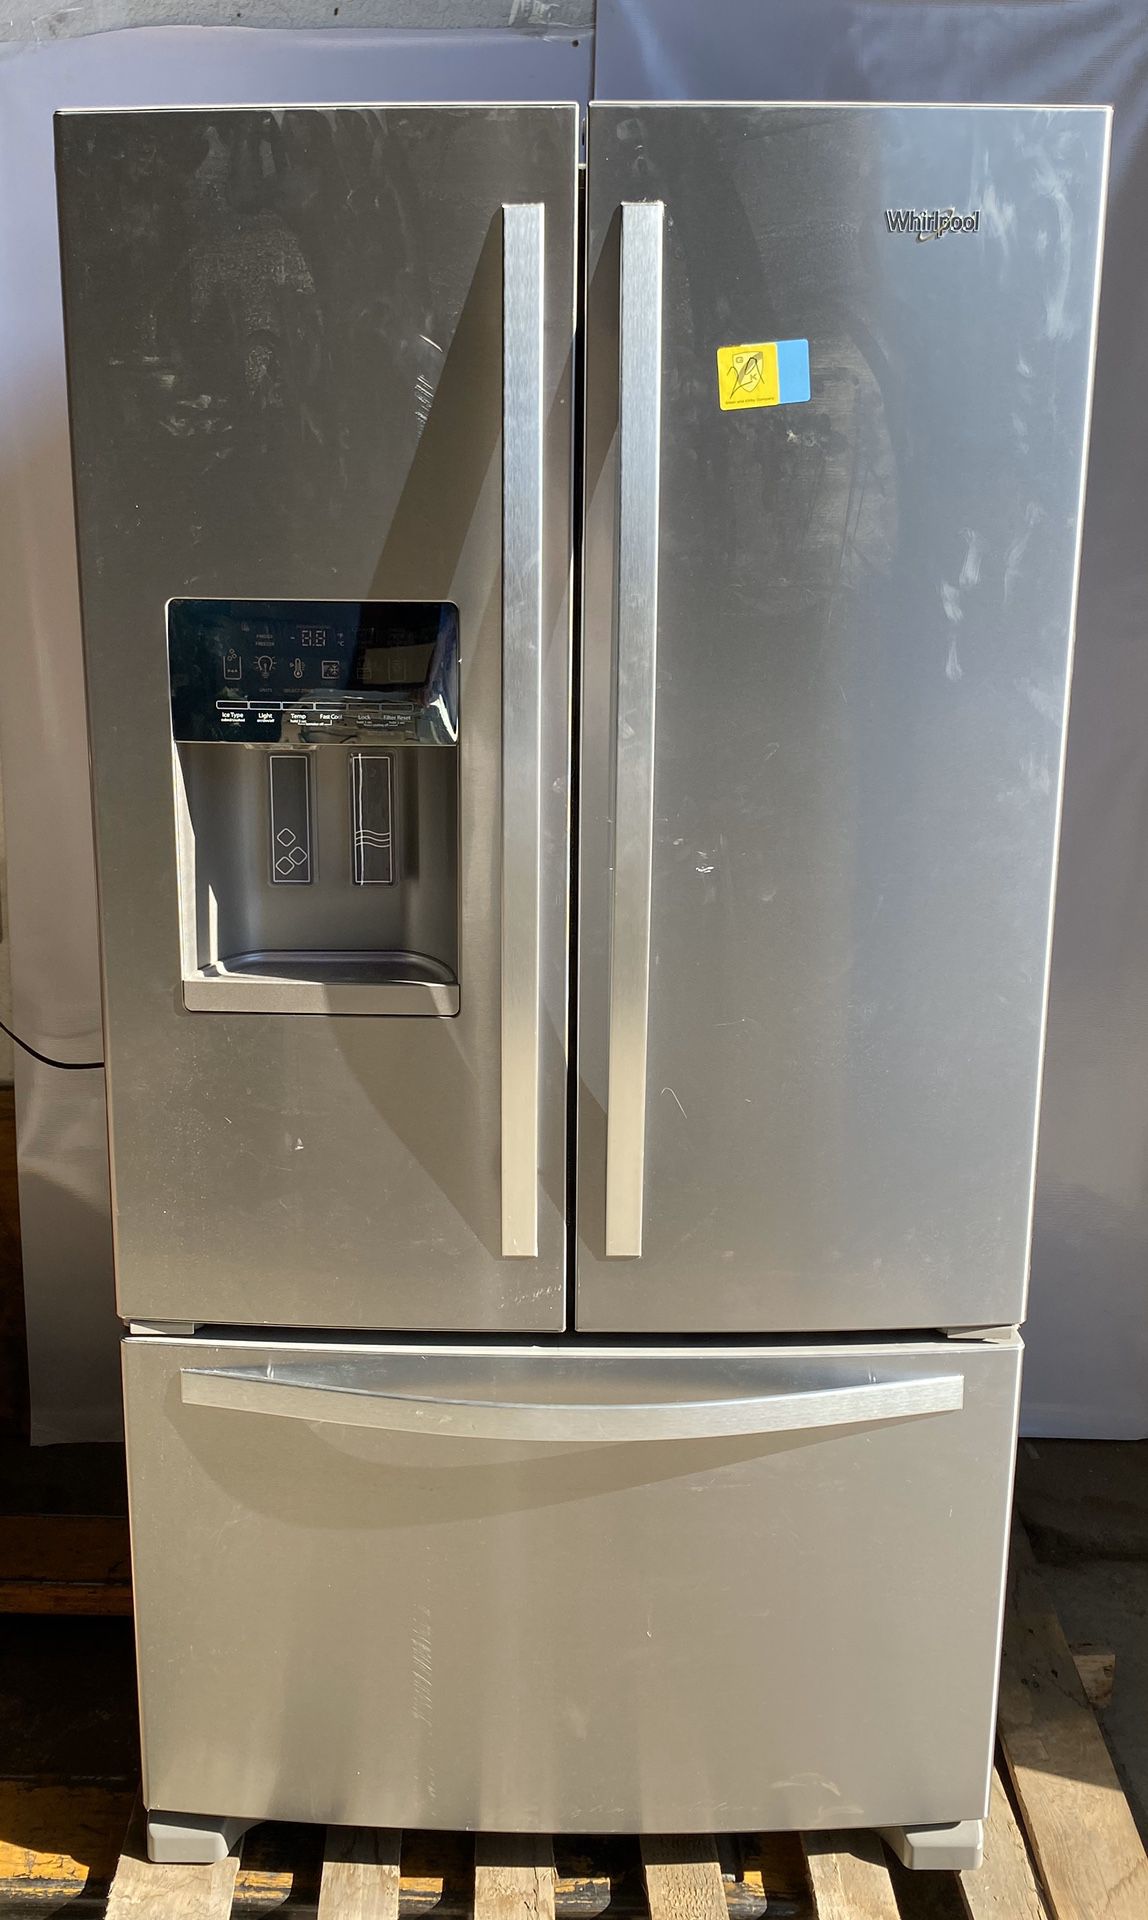 Whirlpool WRF555SDHV 24.7-cu ft French Door Refrigerator with Ice Maker (Fingerprint-Resistant Stainless) ENERGY STAR **Not working properly for part